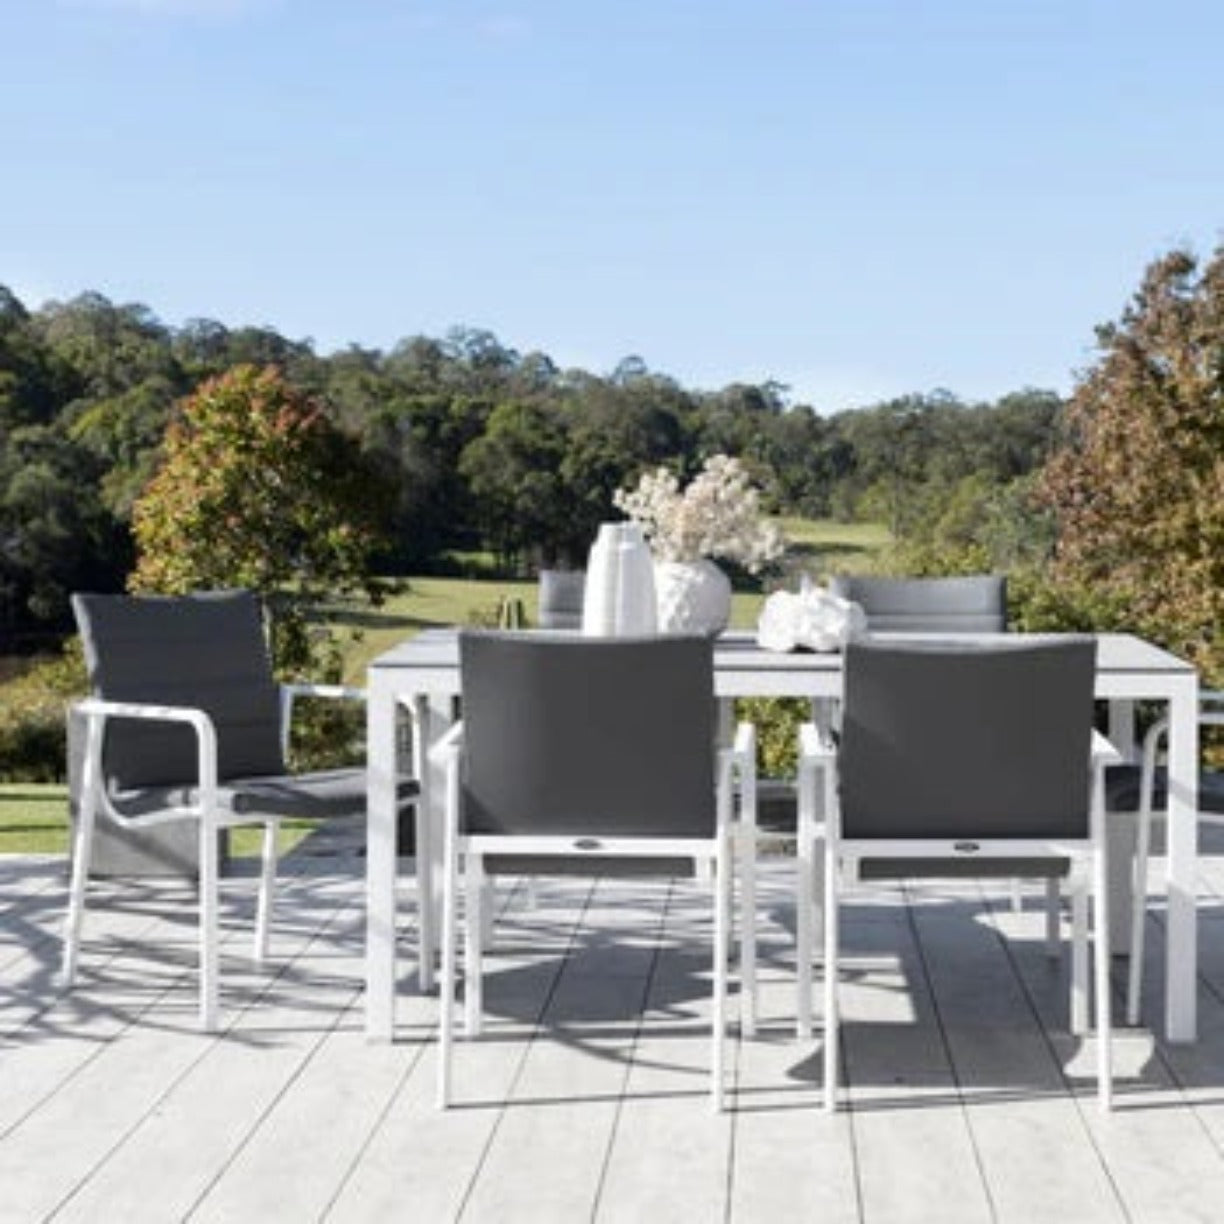 Frejus & Cassis Outdoor Dining Setting - White